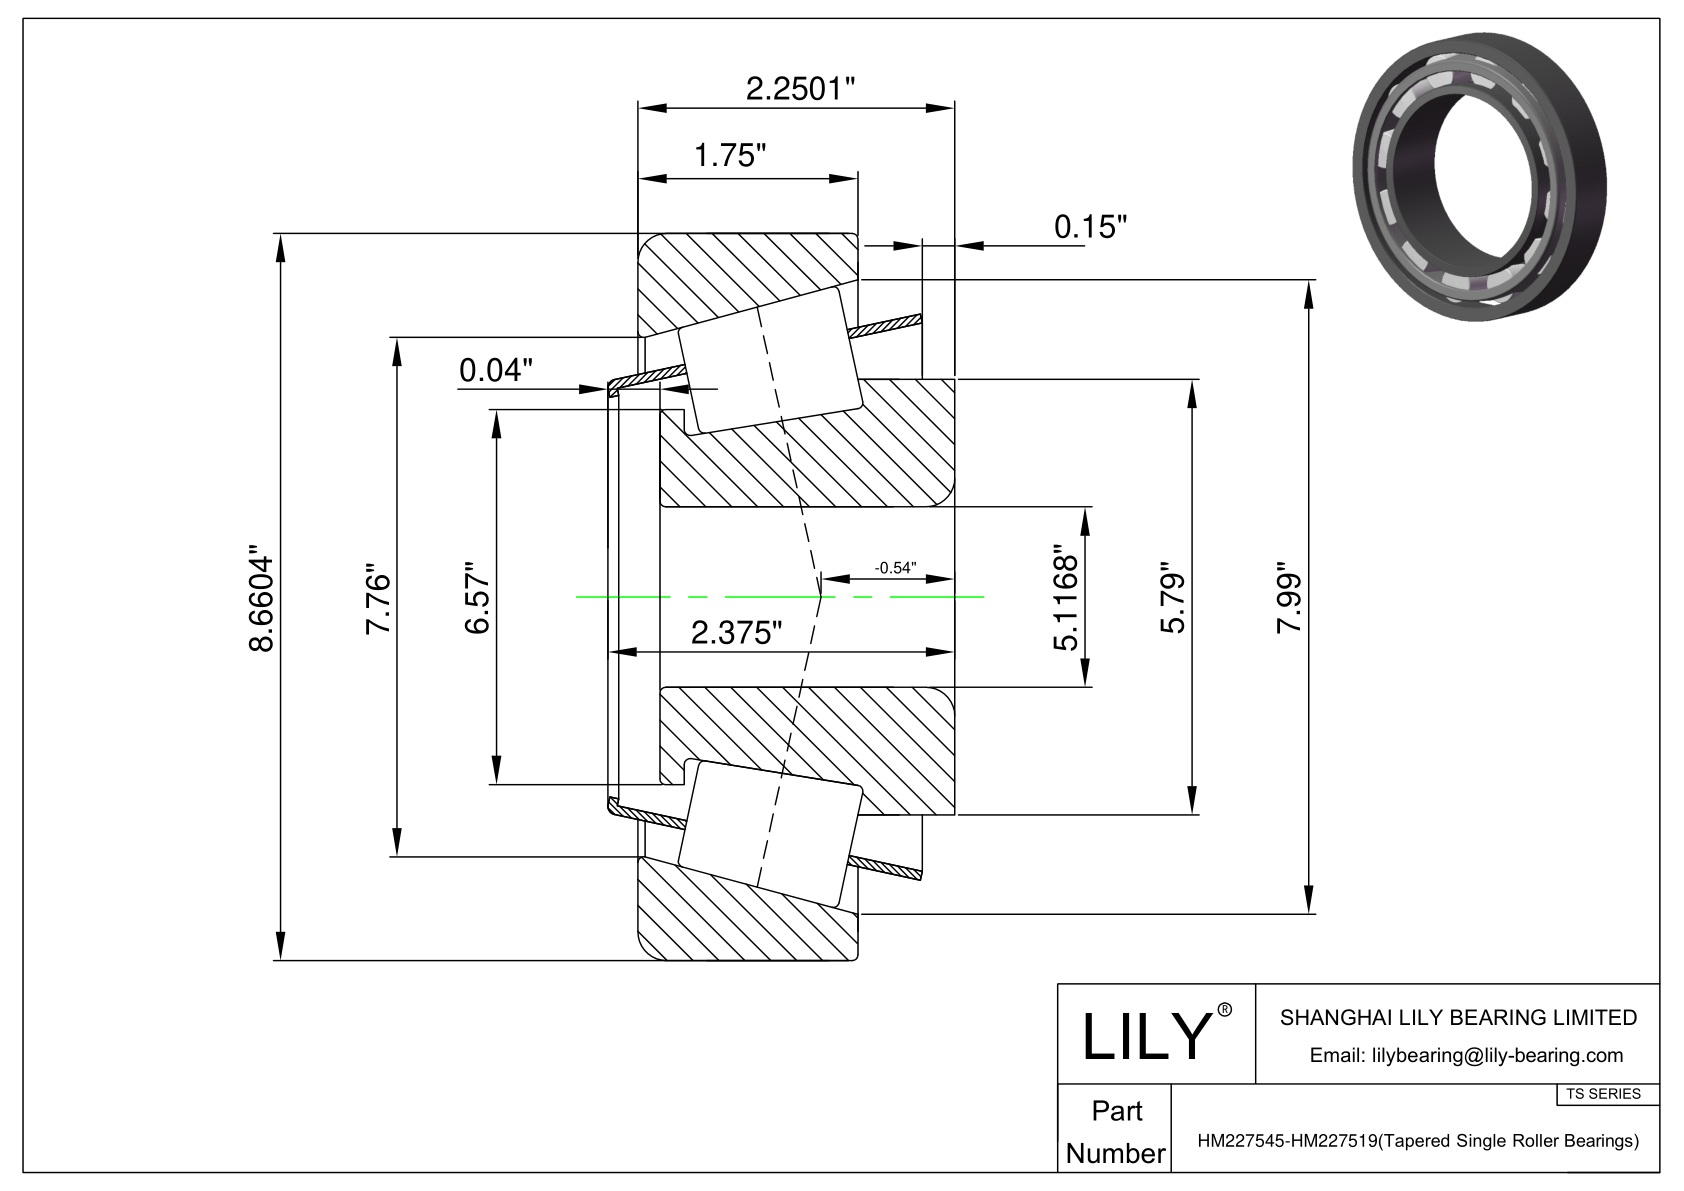 HM227545-HM227519 TS (Tapered Single Roller Bearings) (Imperial) cad drawing